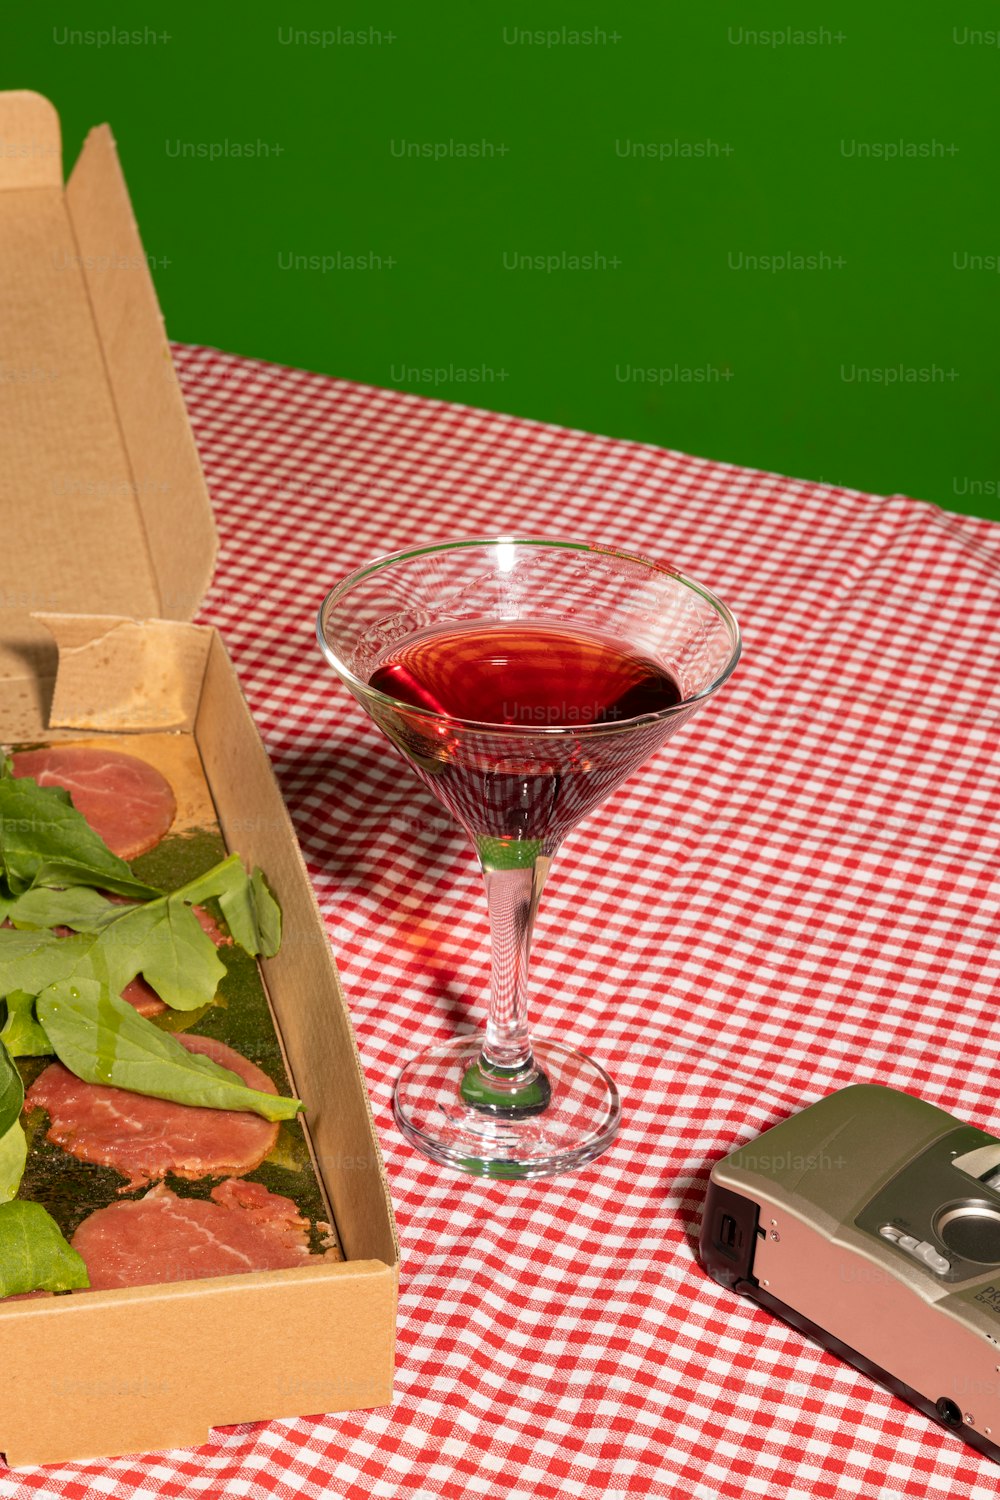 a box of pizza and a glass of wine on a table